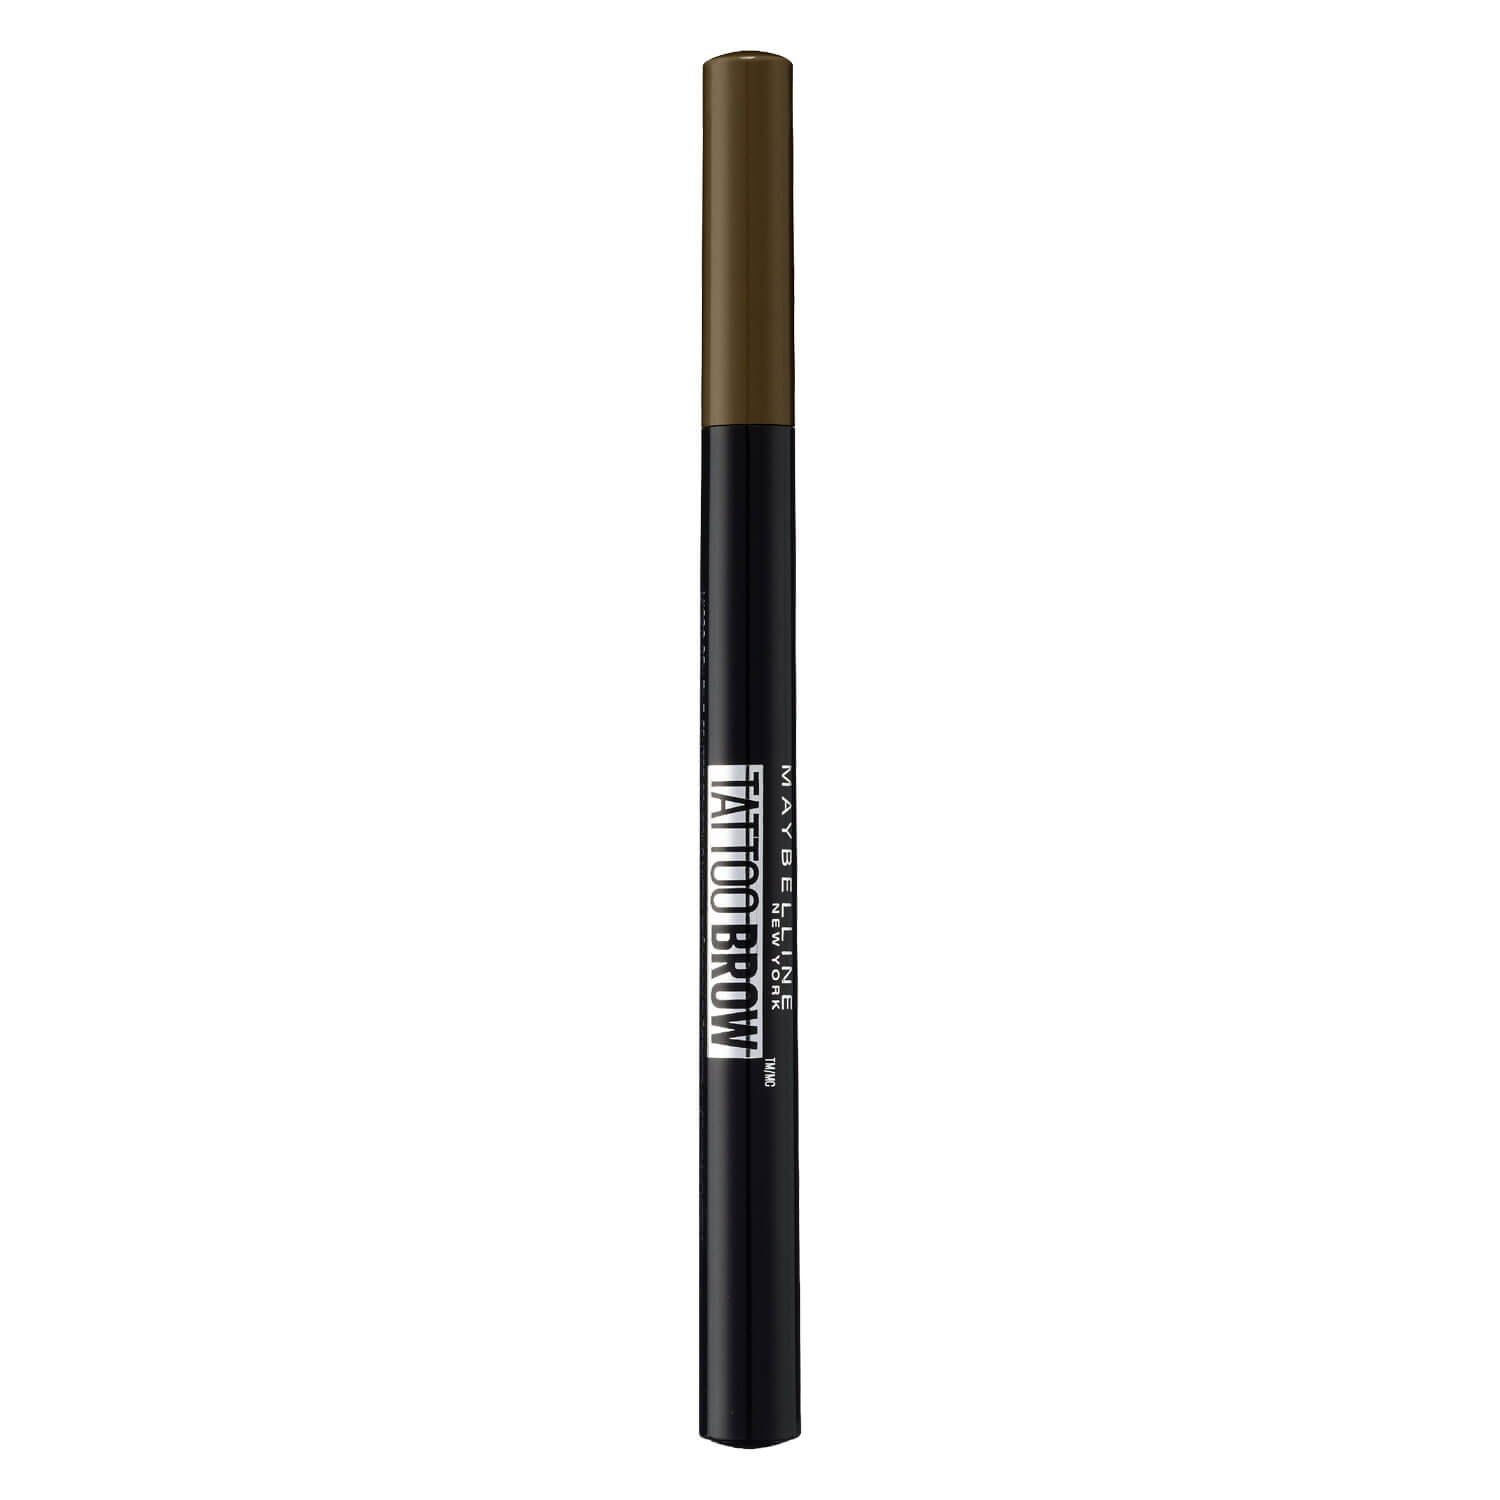 Maybelline NY Brows Augenbrauenstift Brow Deep 130 Tattoo Nr. Brown 